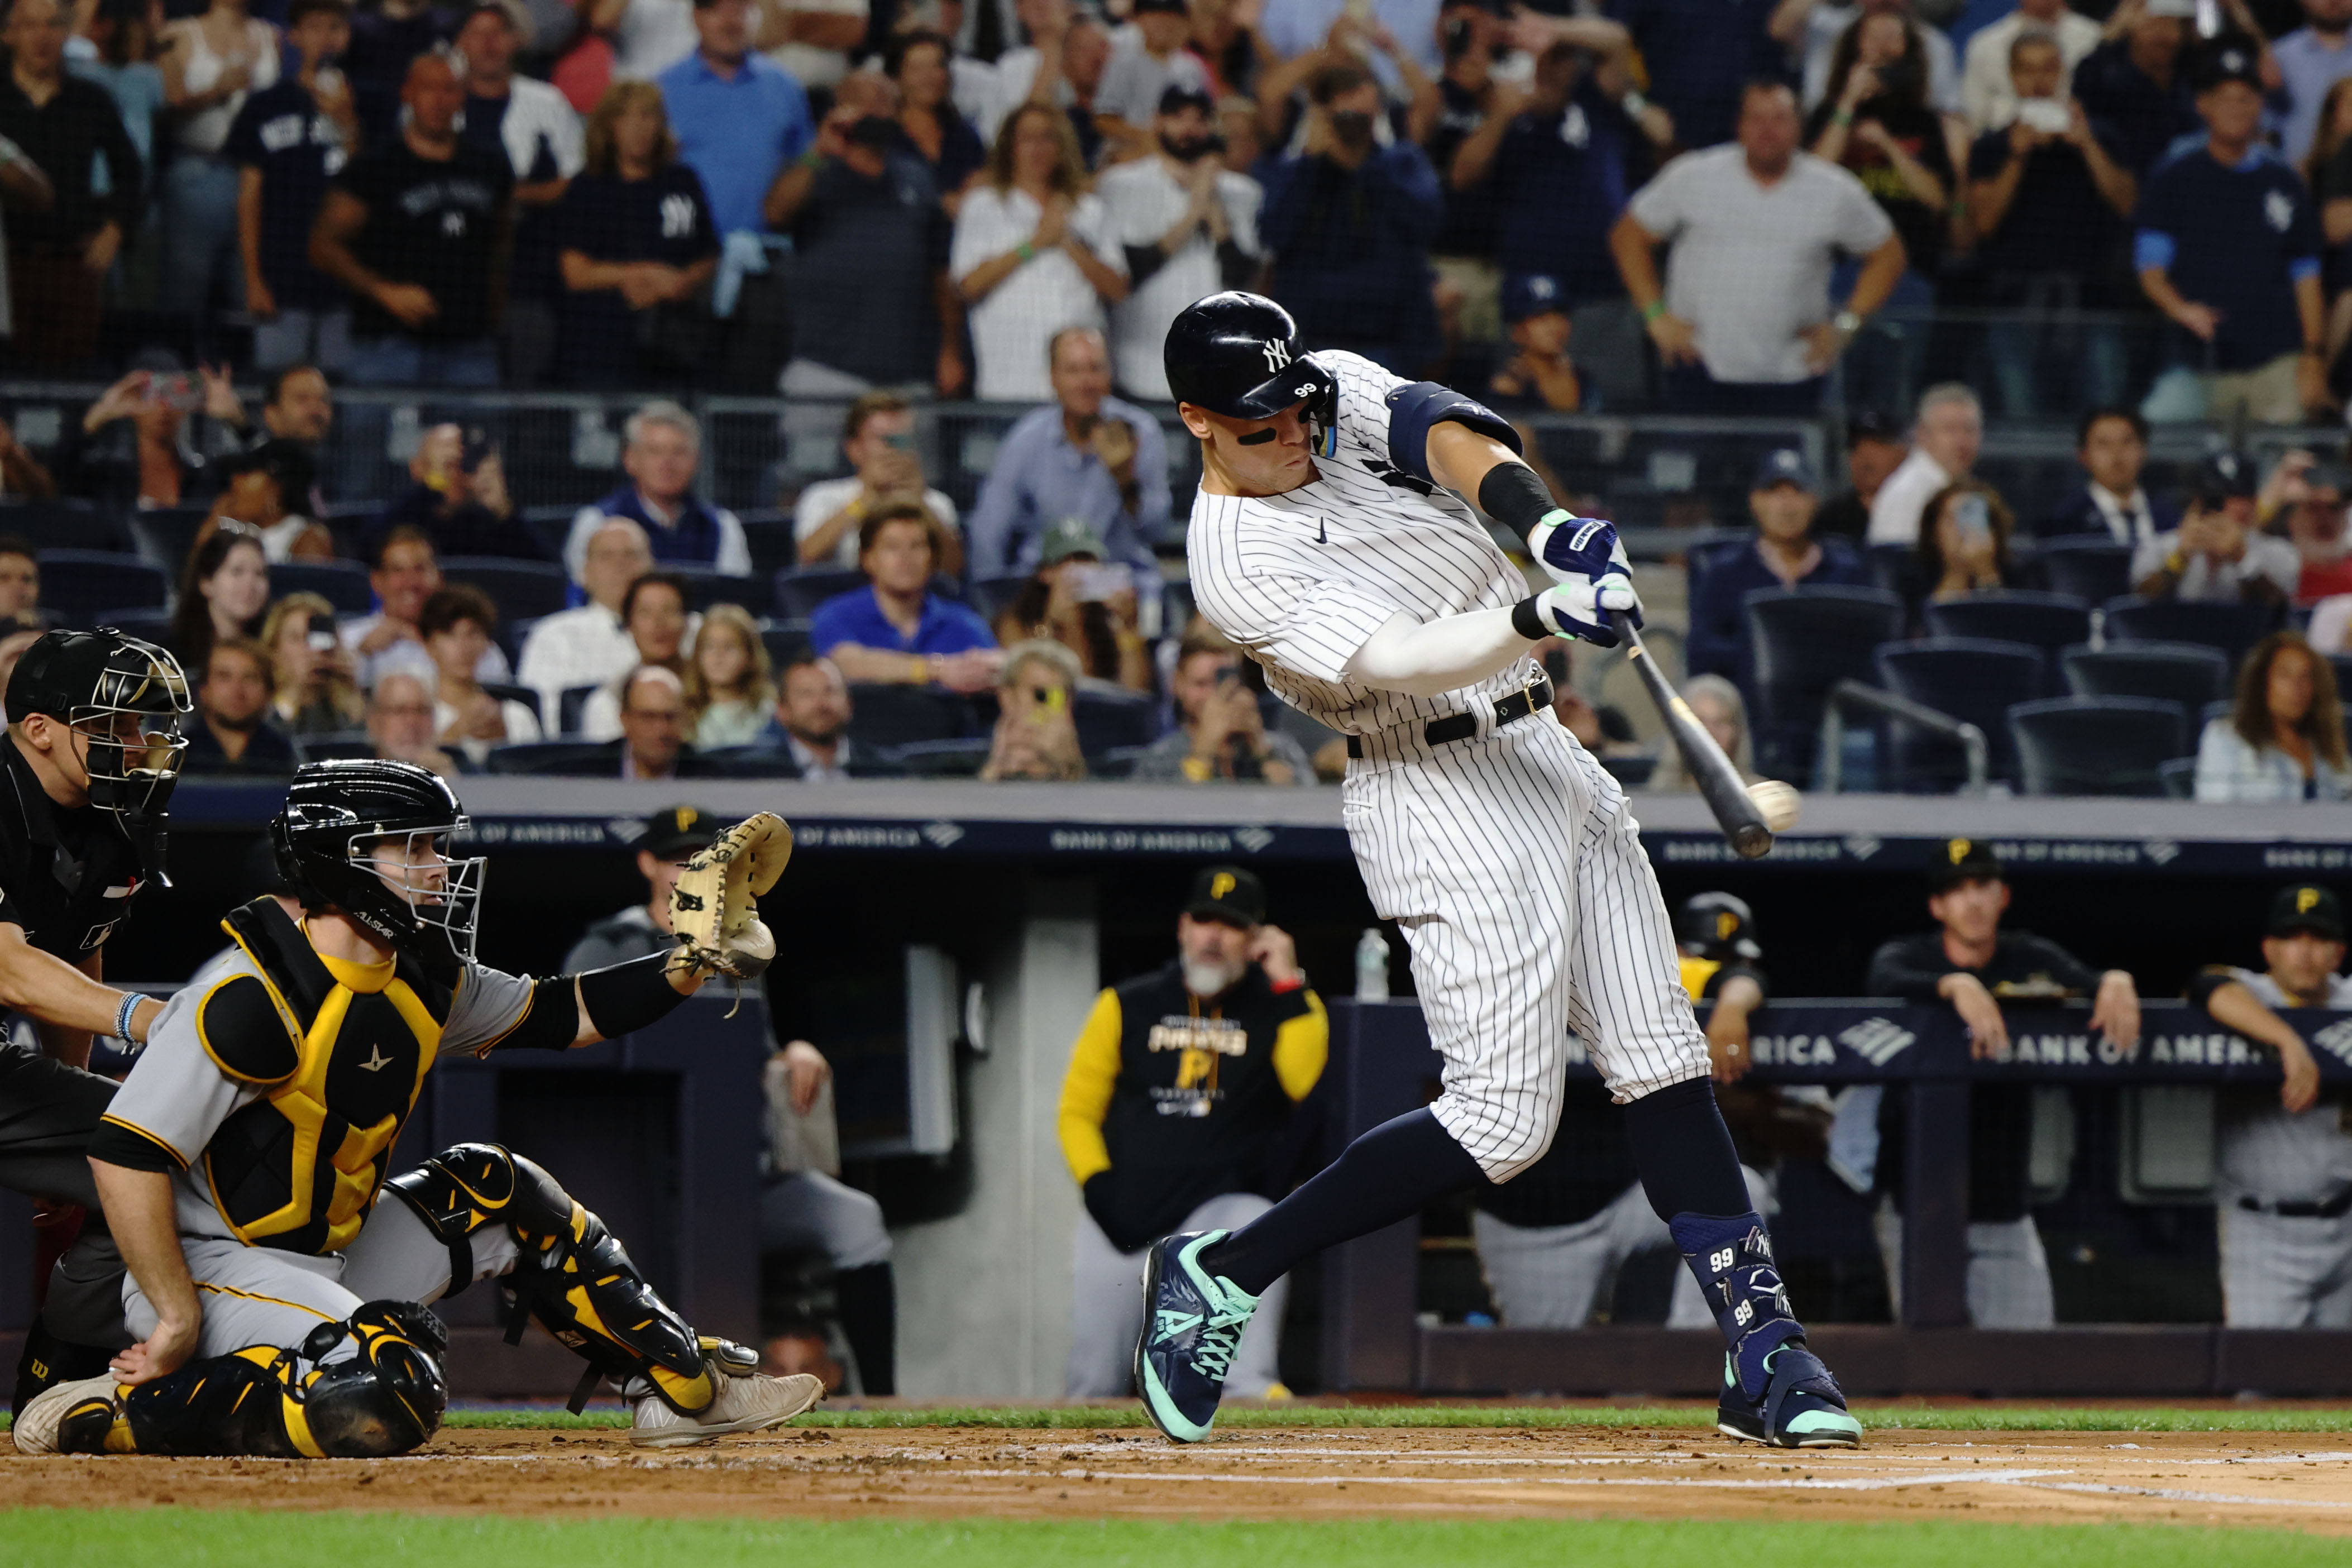 Aaron Judge stays at 61 homers on 61st anniversary of Maris' 61st